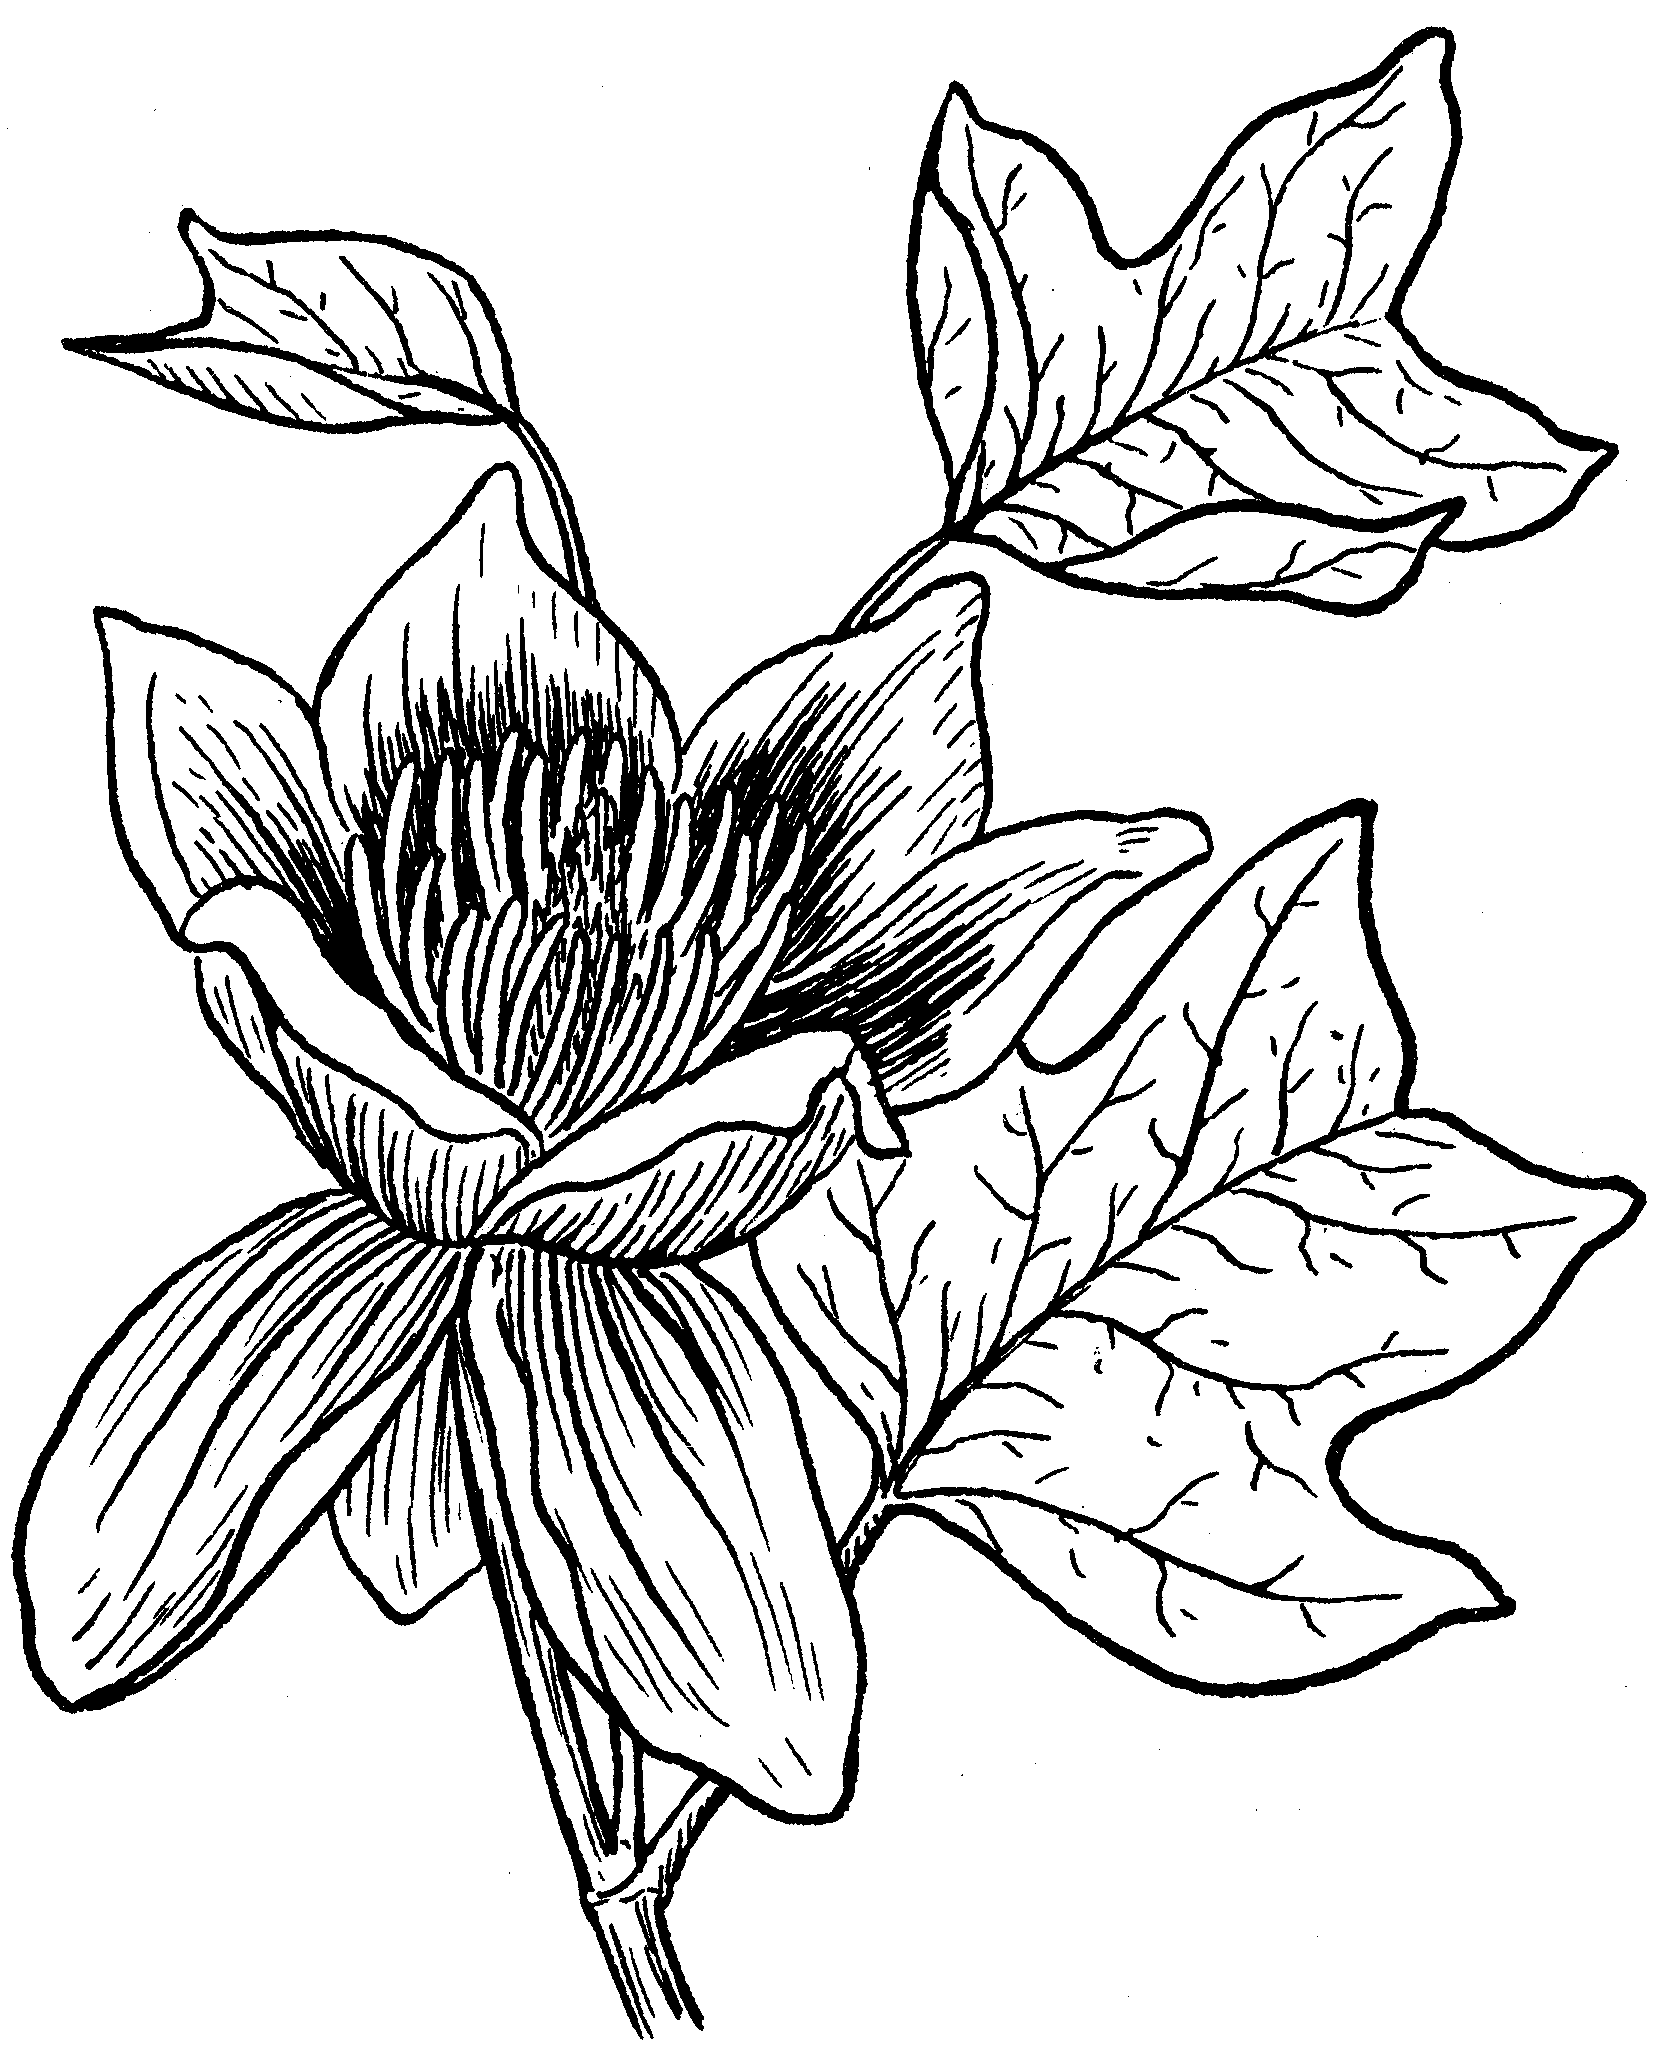 Tulip-Tree (PSF).png - The Work of God's Children